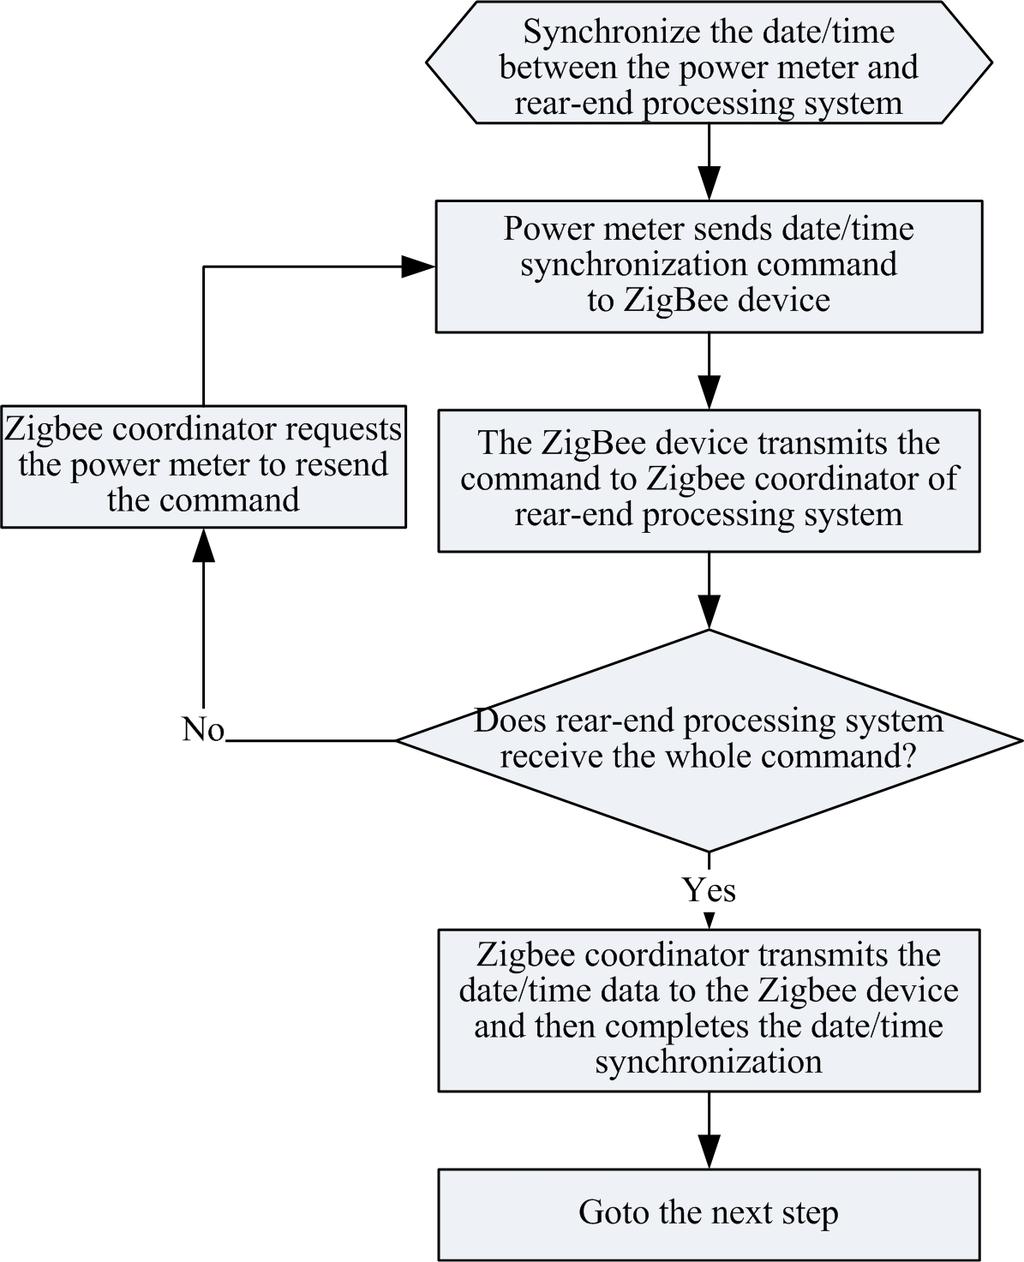 the power meter transmits the date/time synchronization command from its ZigBee device to the ZigBee coordinator after the power meter join the network.